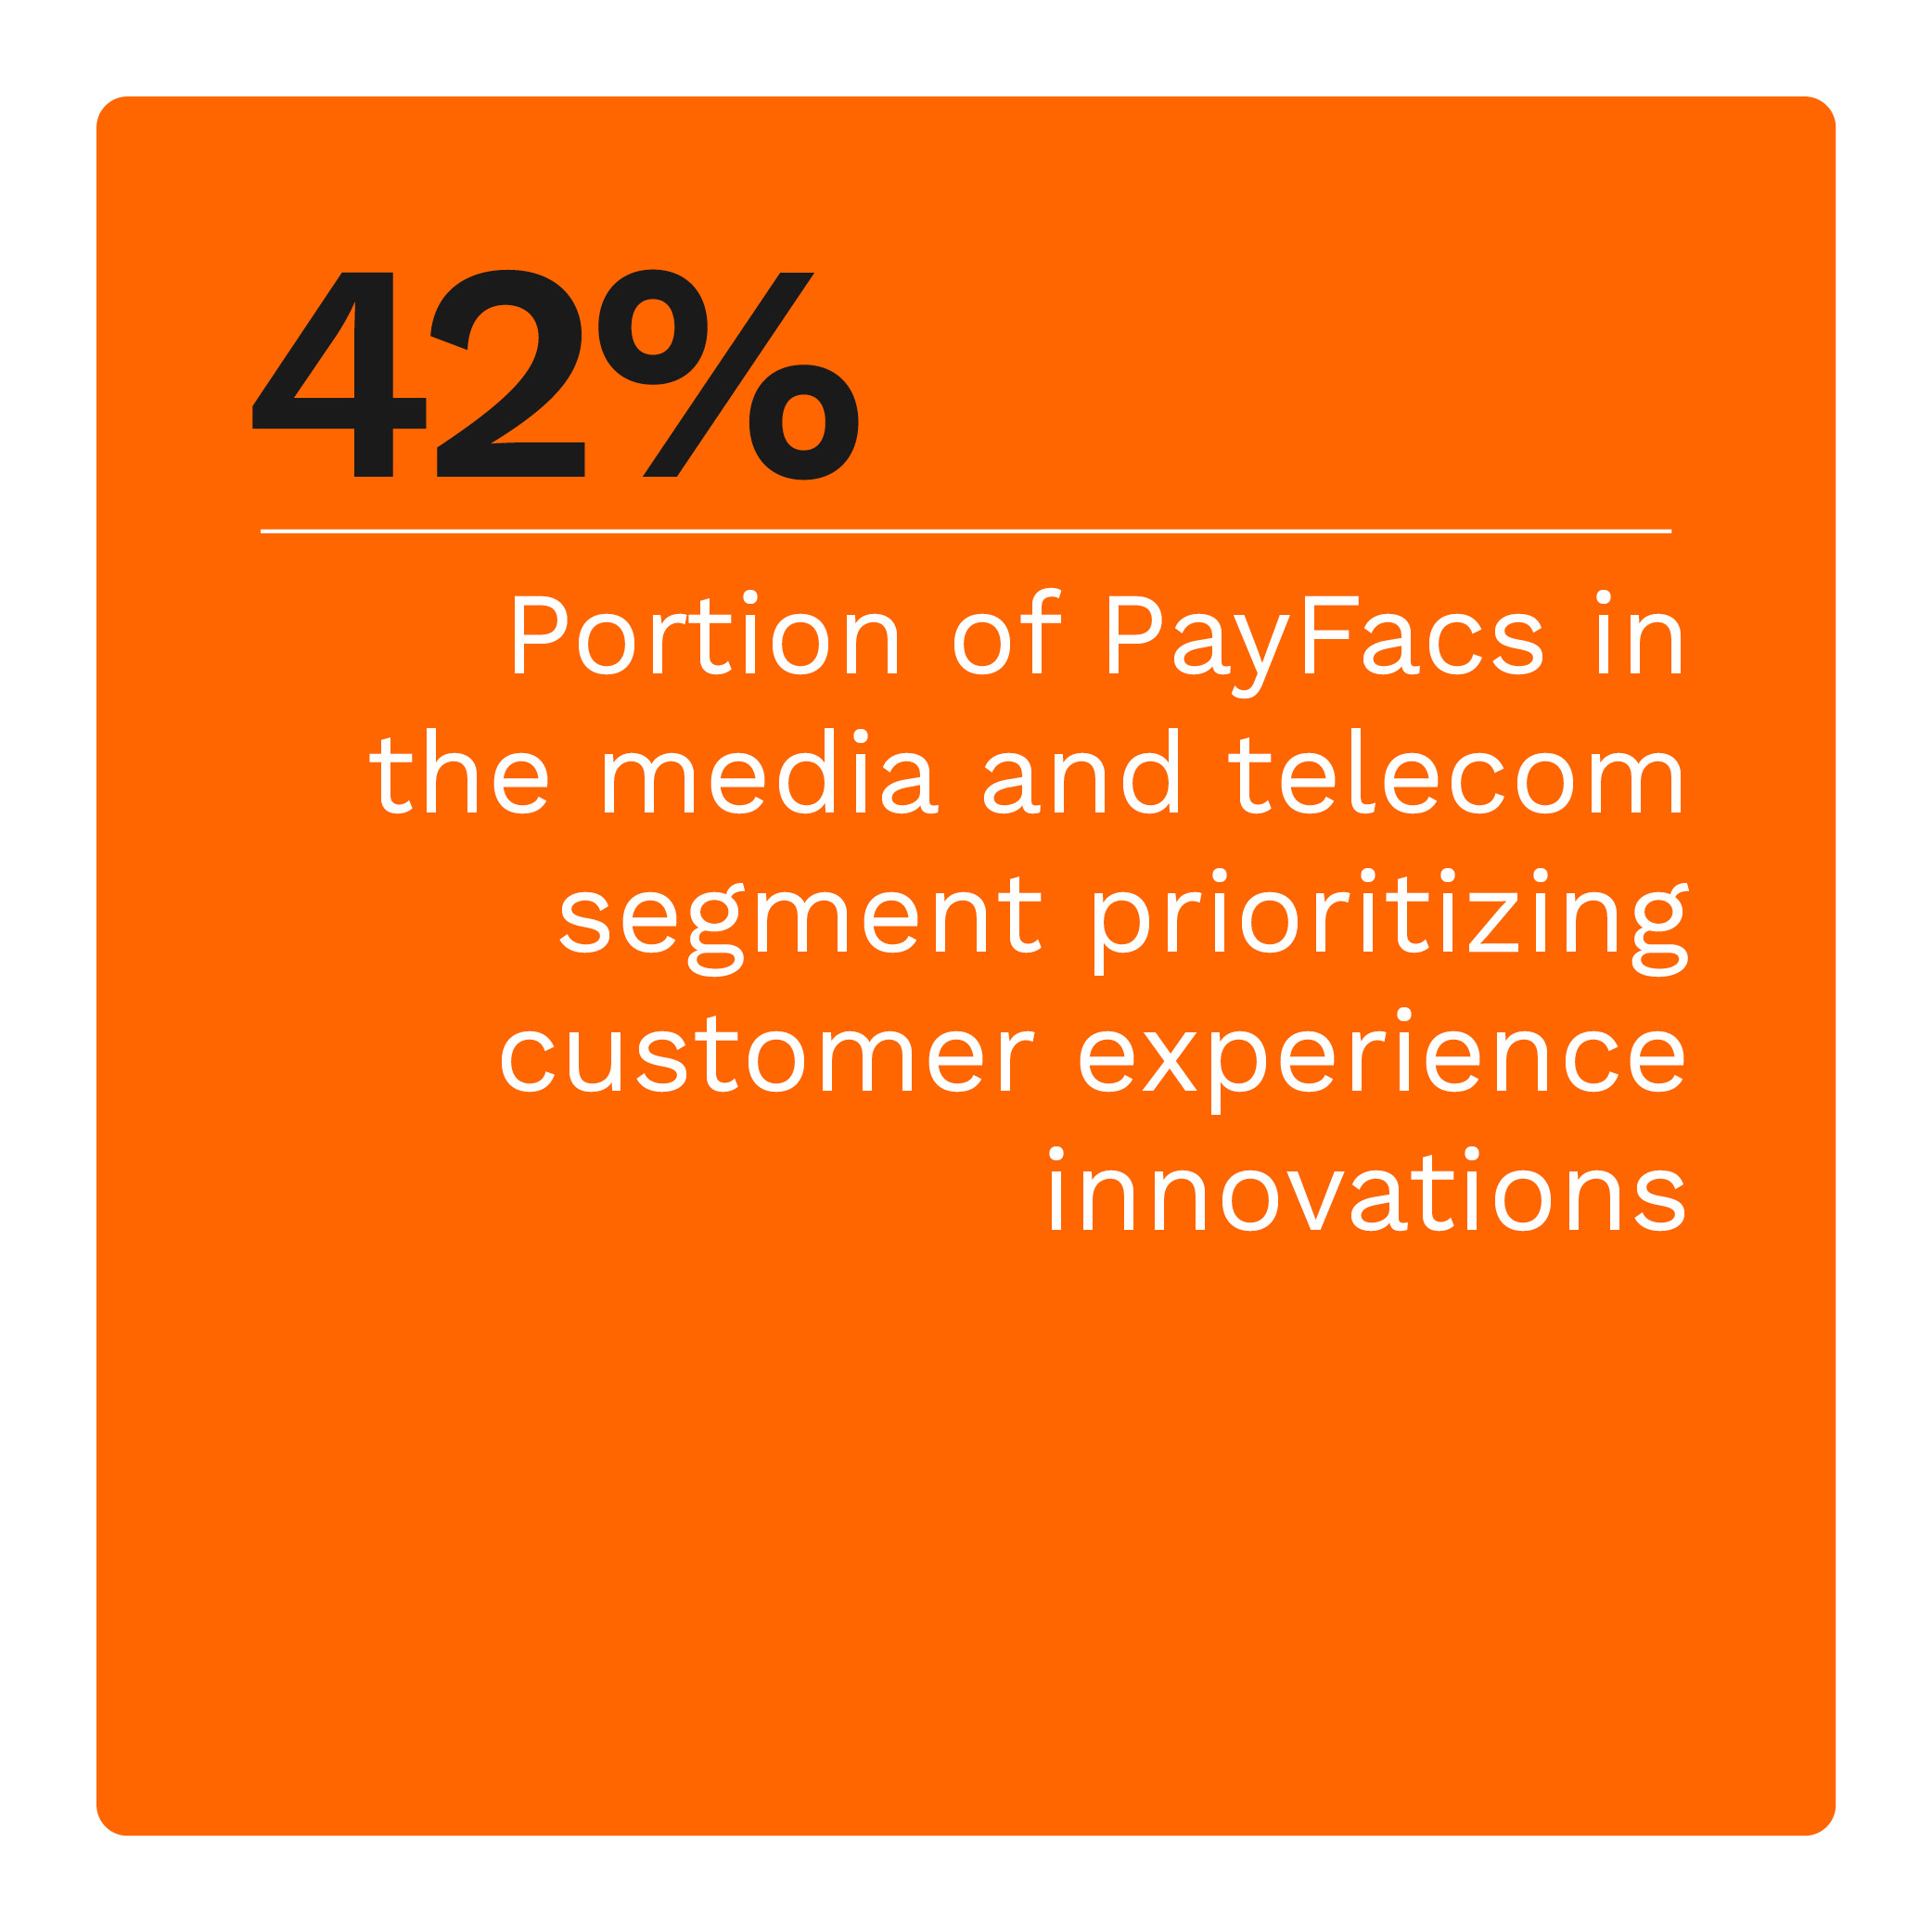 42%: Portion of PayFacs in the media and telecom segment prioritizing customer experience innovations